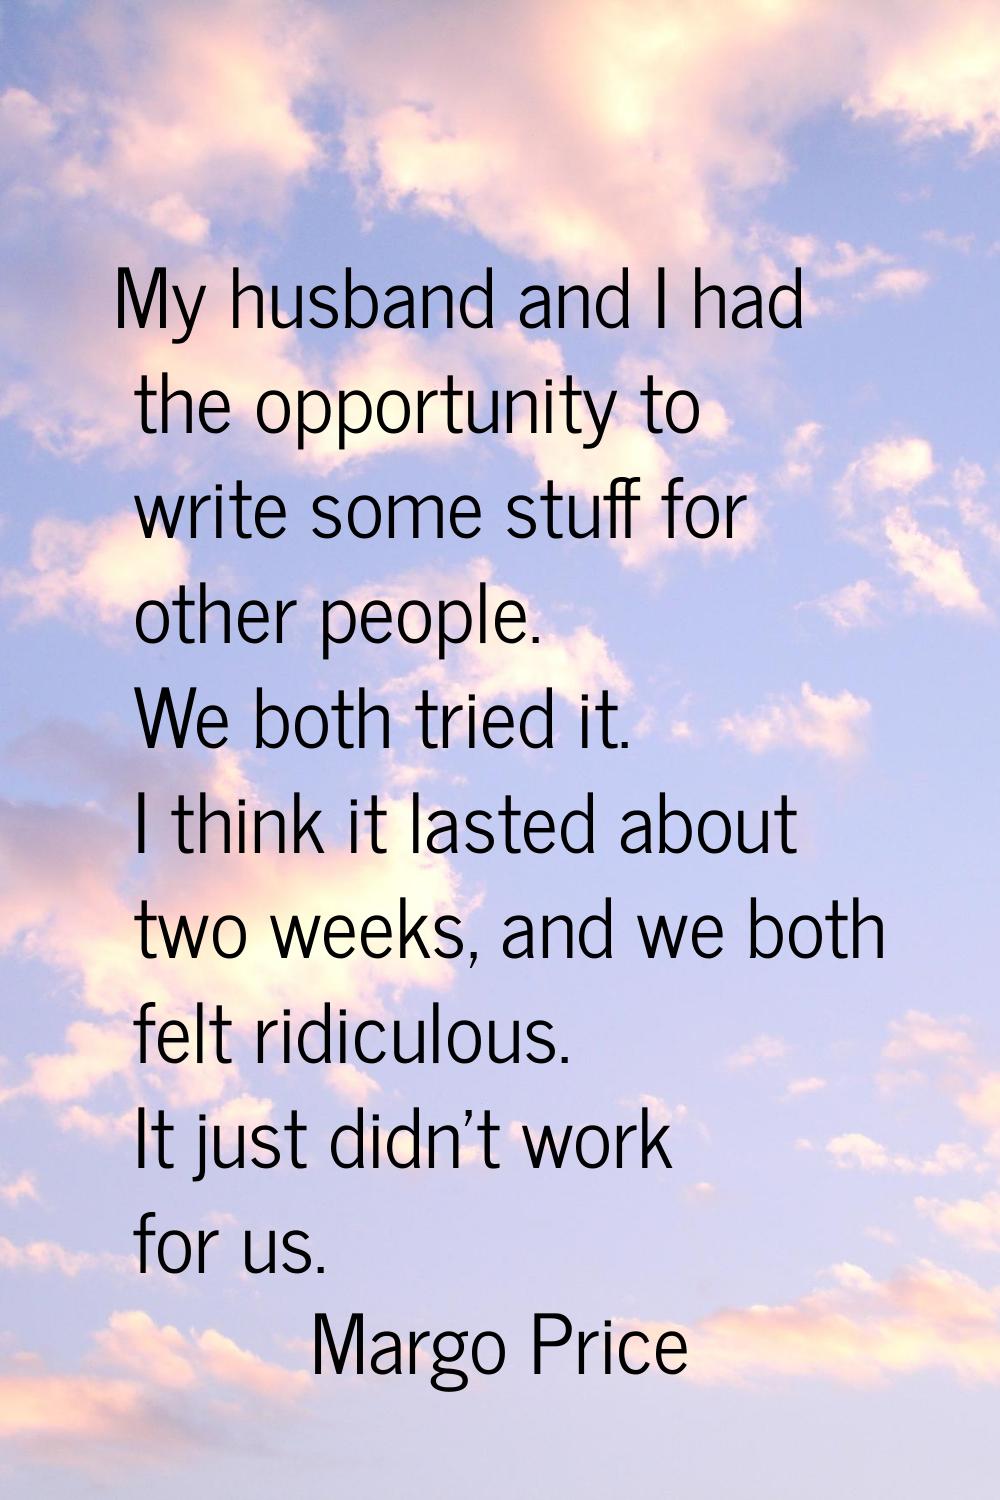 My husband and I had the opportunity to write some stuff for other people. We both tried it. I thin